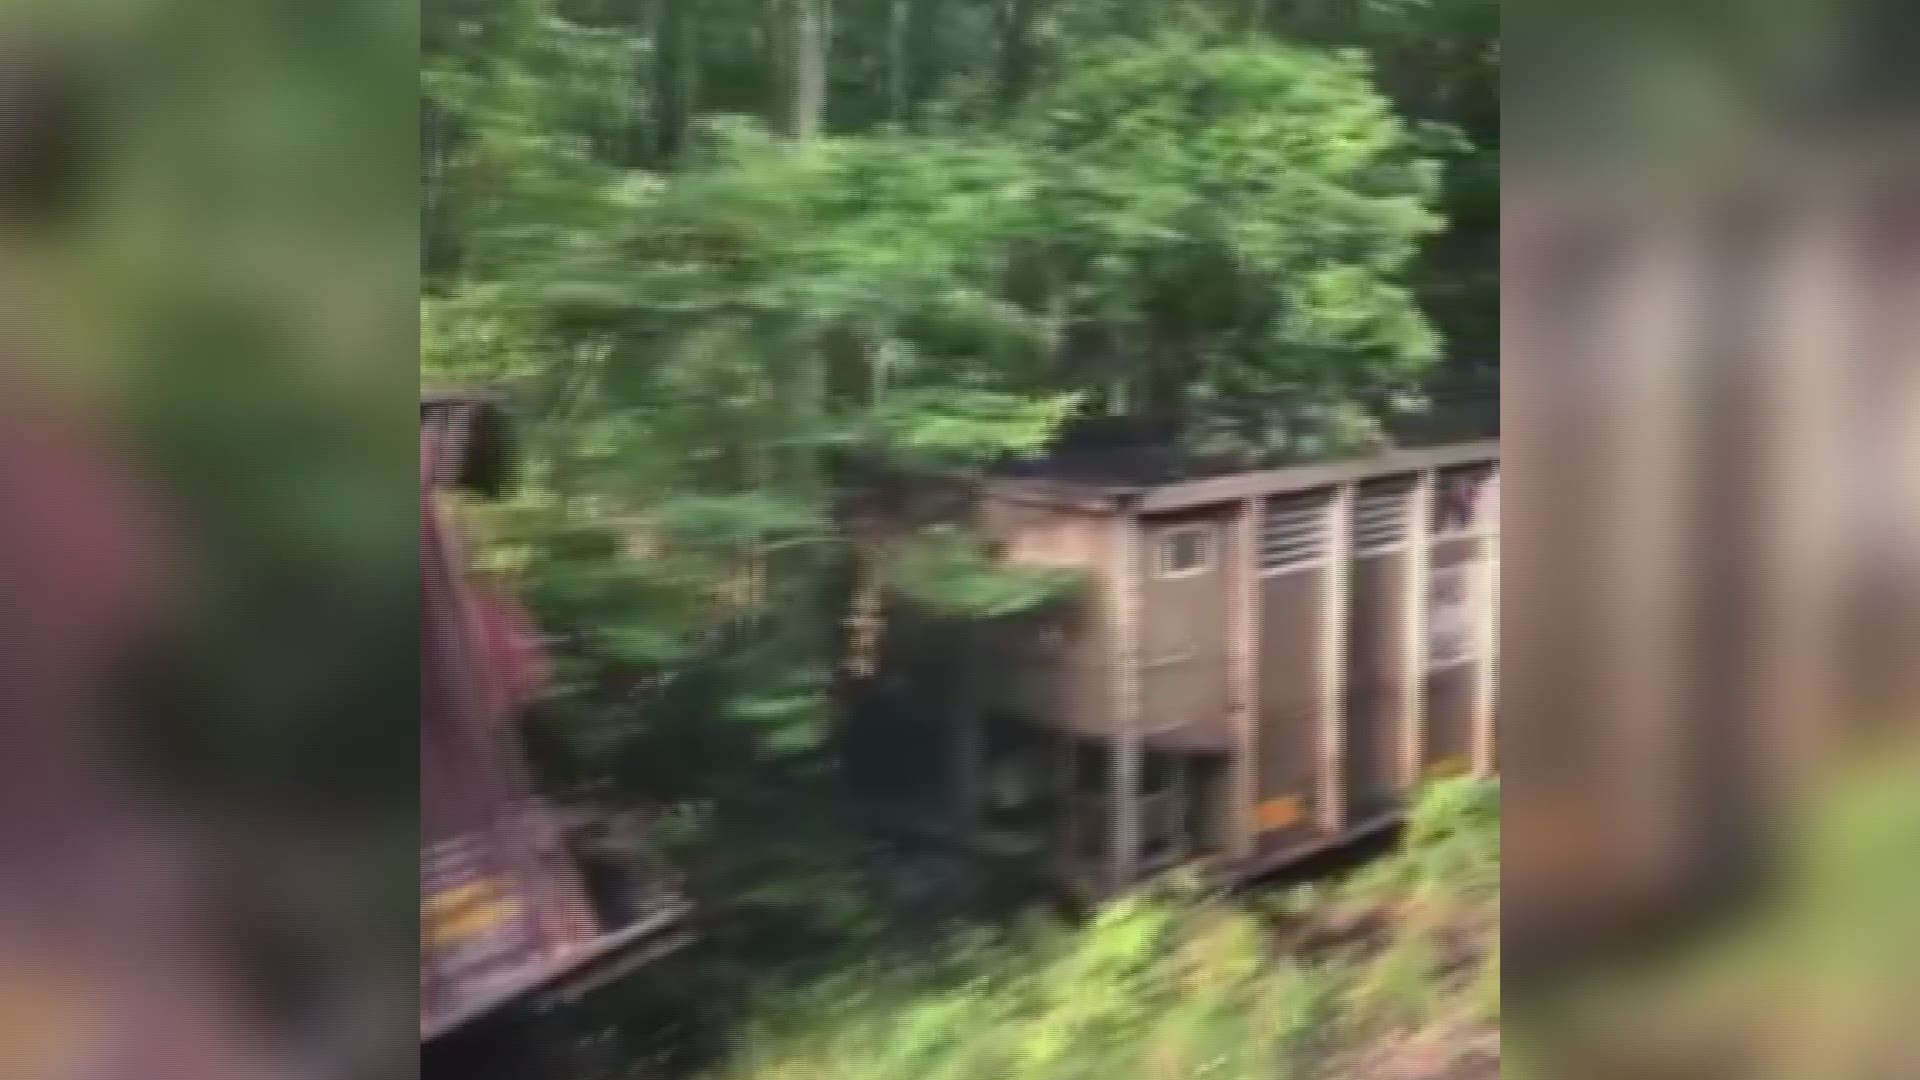 Conrad Brinkman shared this video after Amtrak service resumed on Thursday. A coal train derailed at the Great Dismal Swamp on Tuesday, June 25, 2019. (Video: Conrad Brinkman)